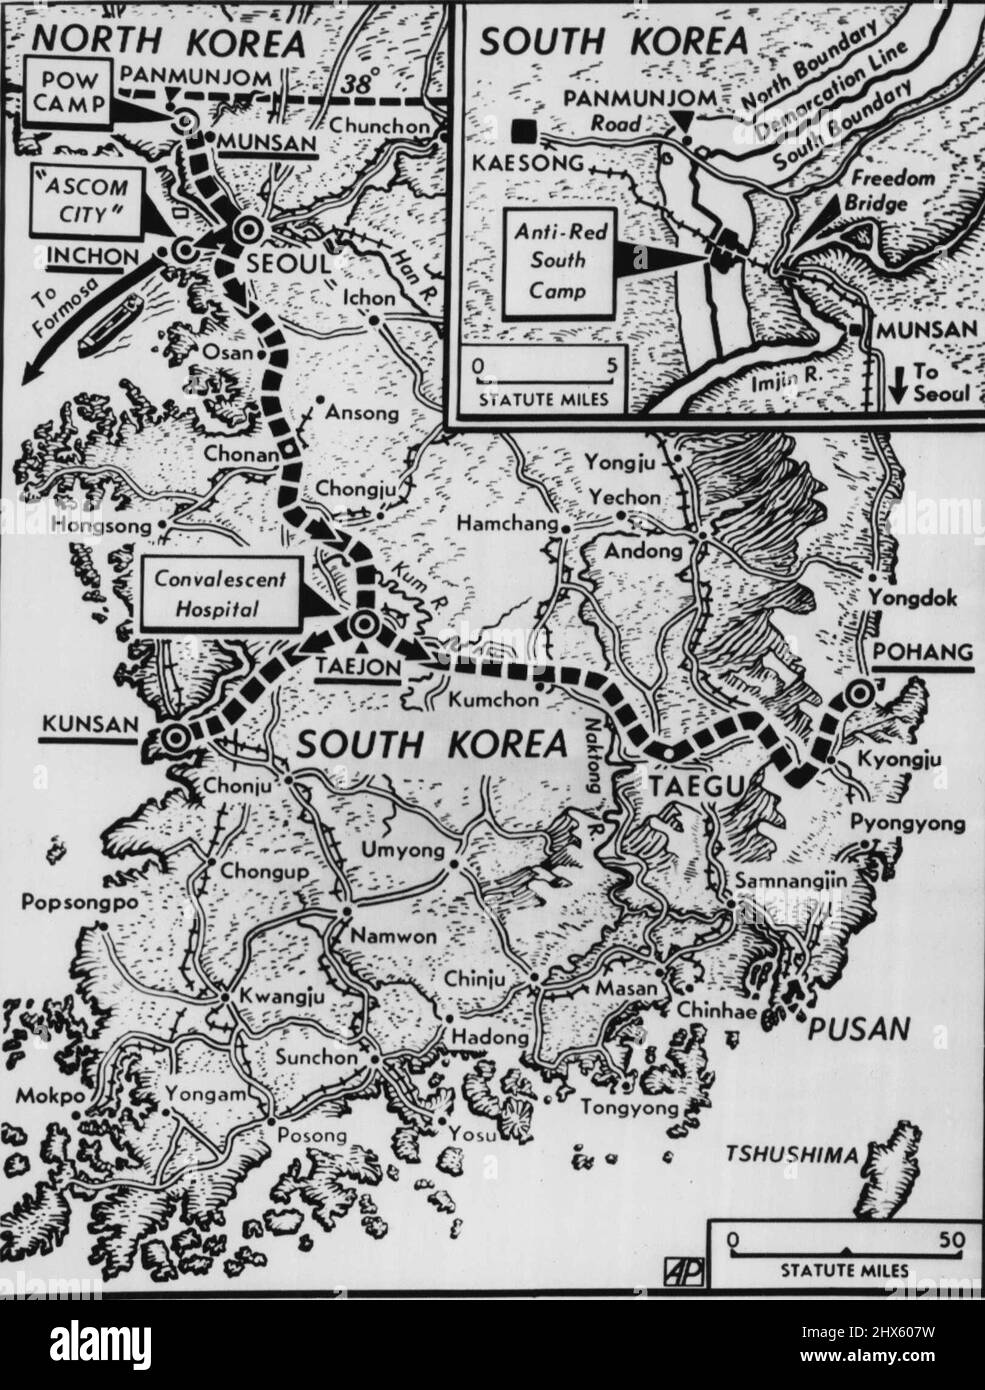 Routes To Freedom -- Map locates routes POWs will taka following their scheduled release Wednesday from anti-Red prison camp southeast of Panmunjom. Chinese anti-Communist POWs will move in trucks through Seoul to Ascom City near Inchon for Formosa bound ships. Koreans will use railroad, dotted line, enroute to South Korean army induction centers at Pohang and Kunsan where they will he processed and restored to civilian status. Any sick Korean prisoners will probably go to convalescent hospital Stock Photo